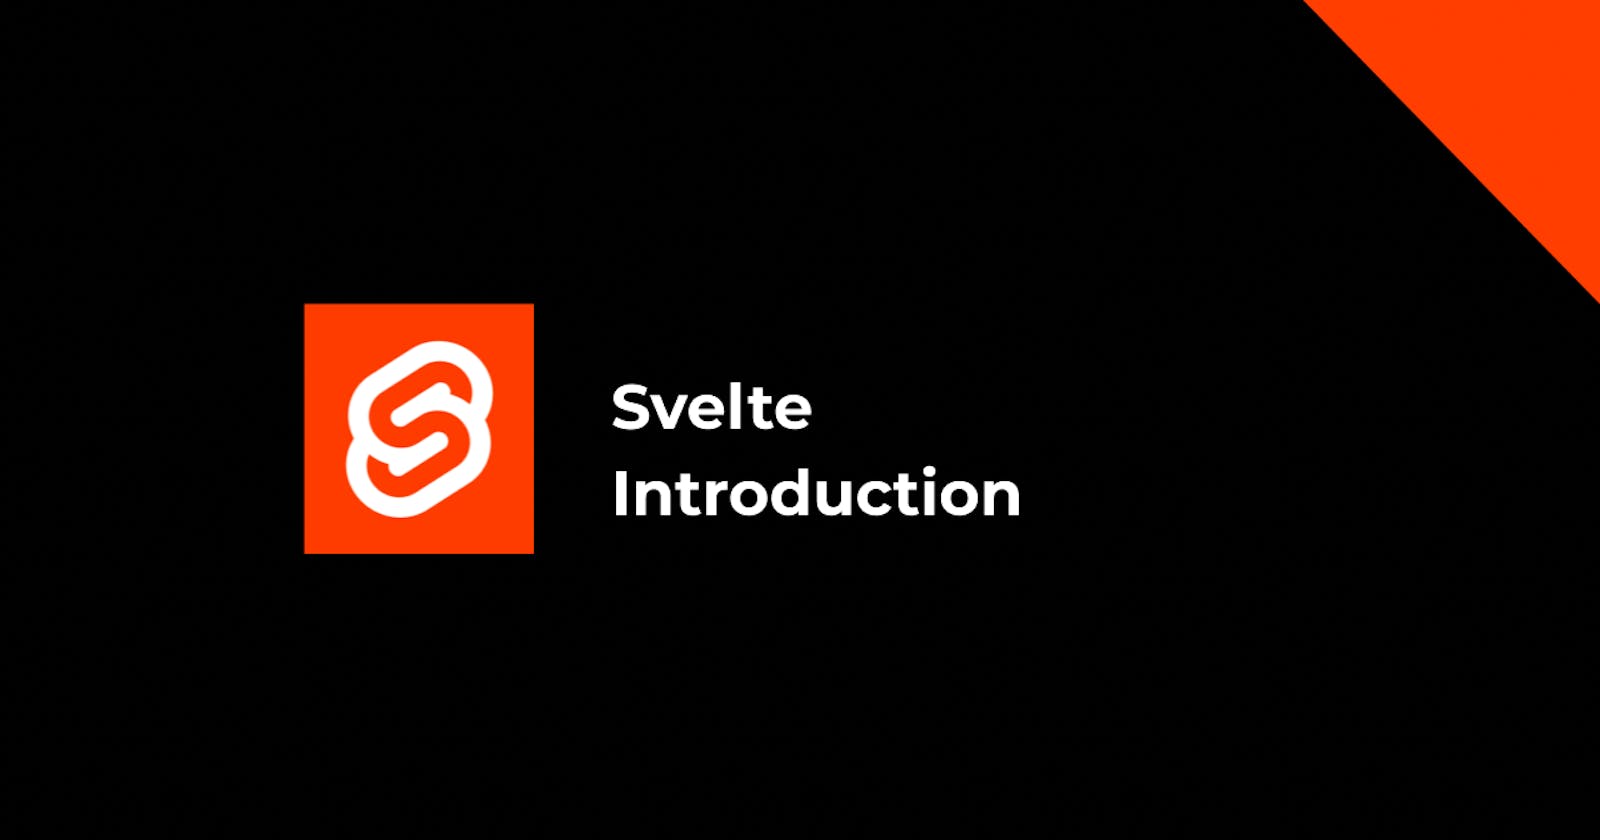 Here's why a new web developer should get acquainted with SvelteJS?(2022)